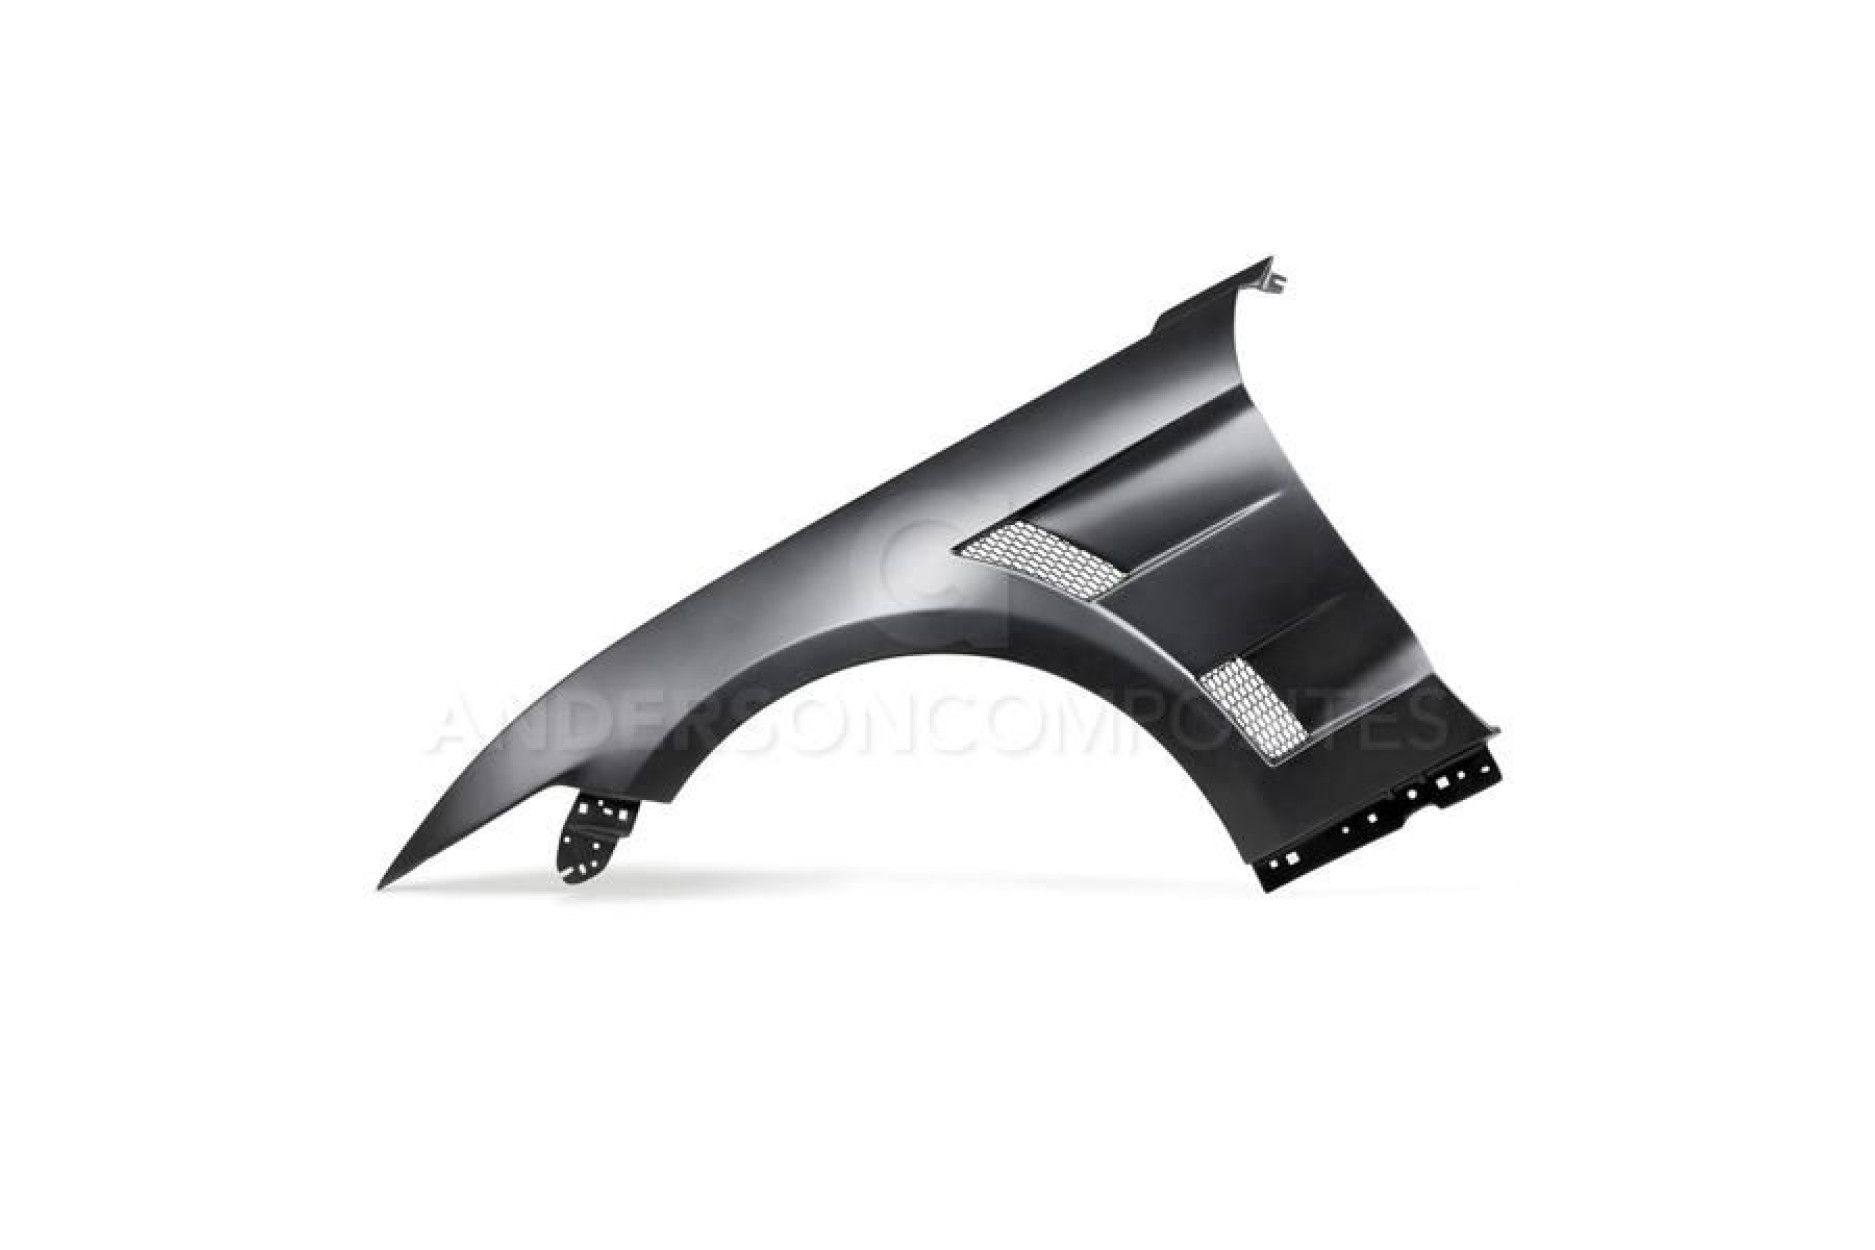 Anderson Composites Type-AT carbon fiber front fenders for 2015-2017 Ford Mustang (0.4inch wider)